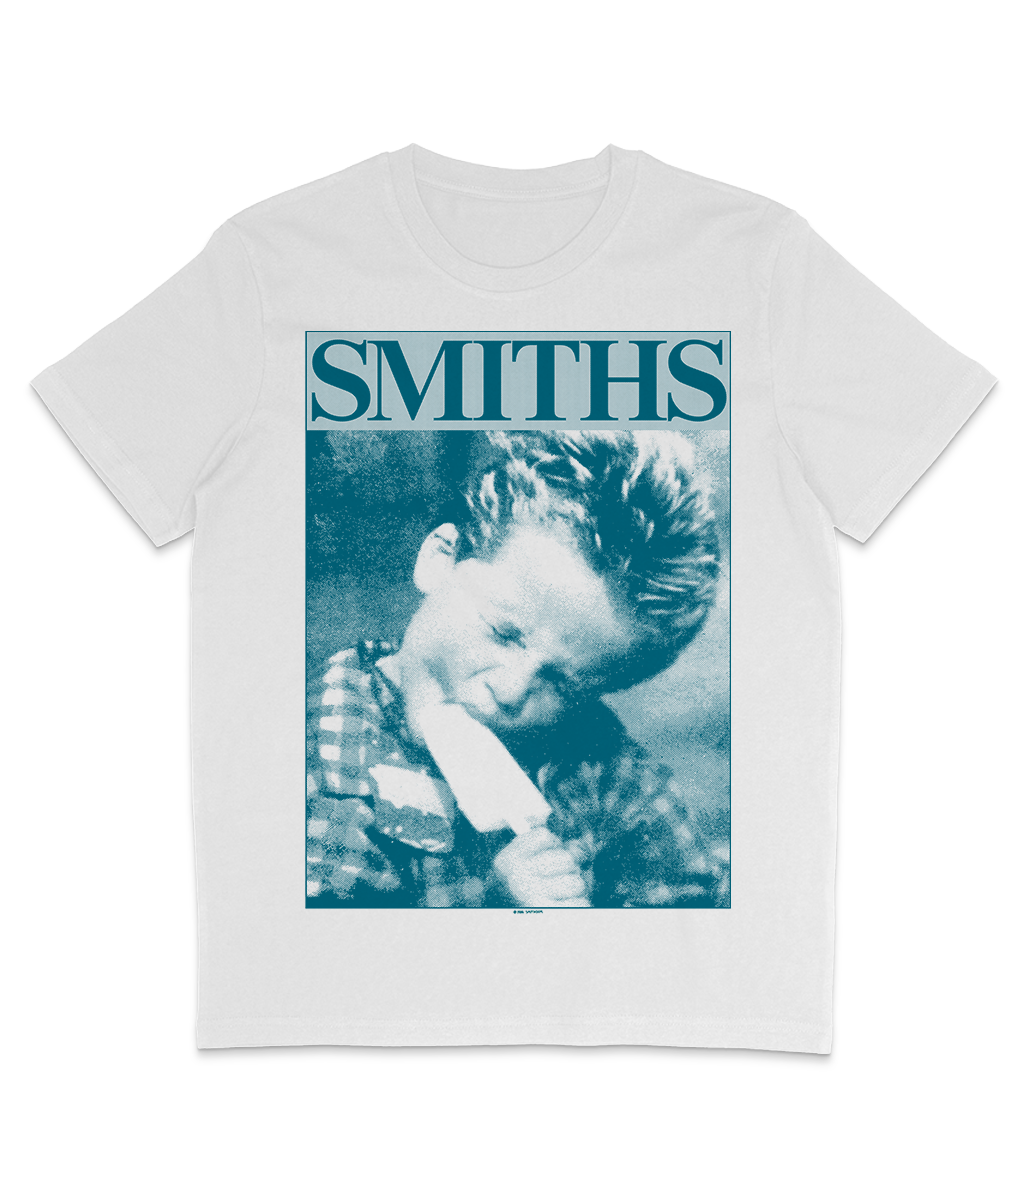 THE SMITHS - 'Boy With Lolly - Smithdom - 1986 - UK Blue